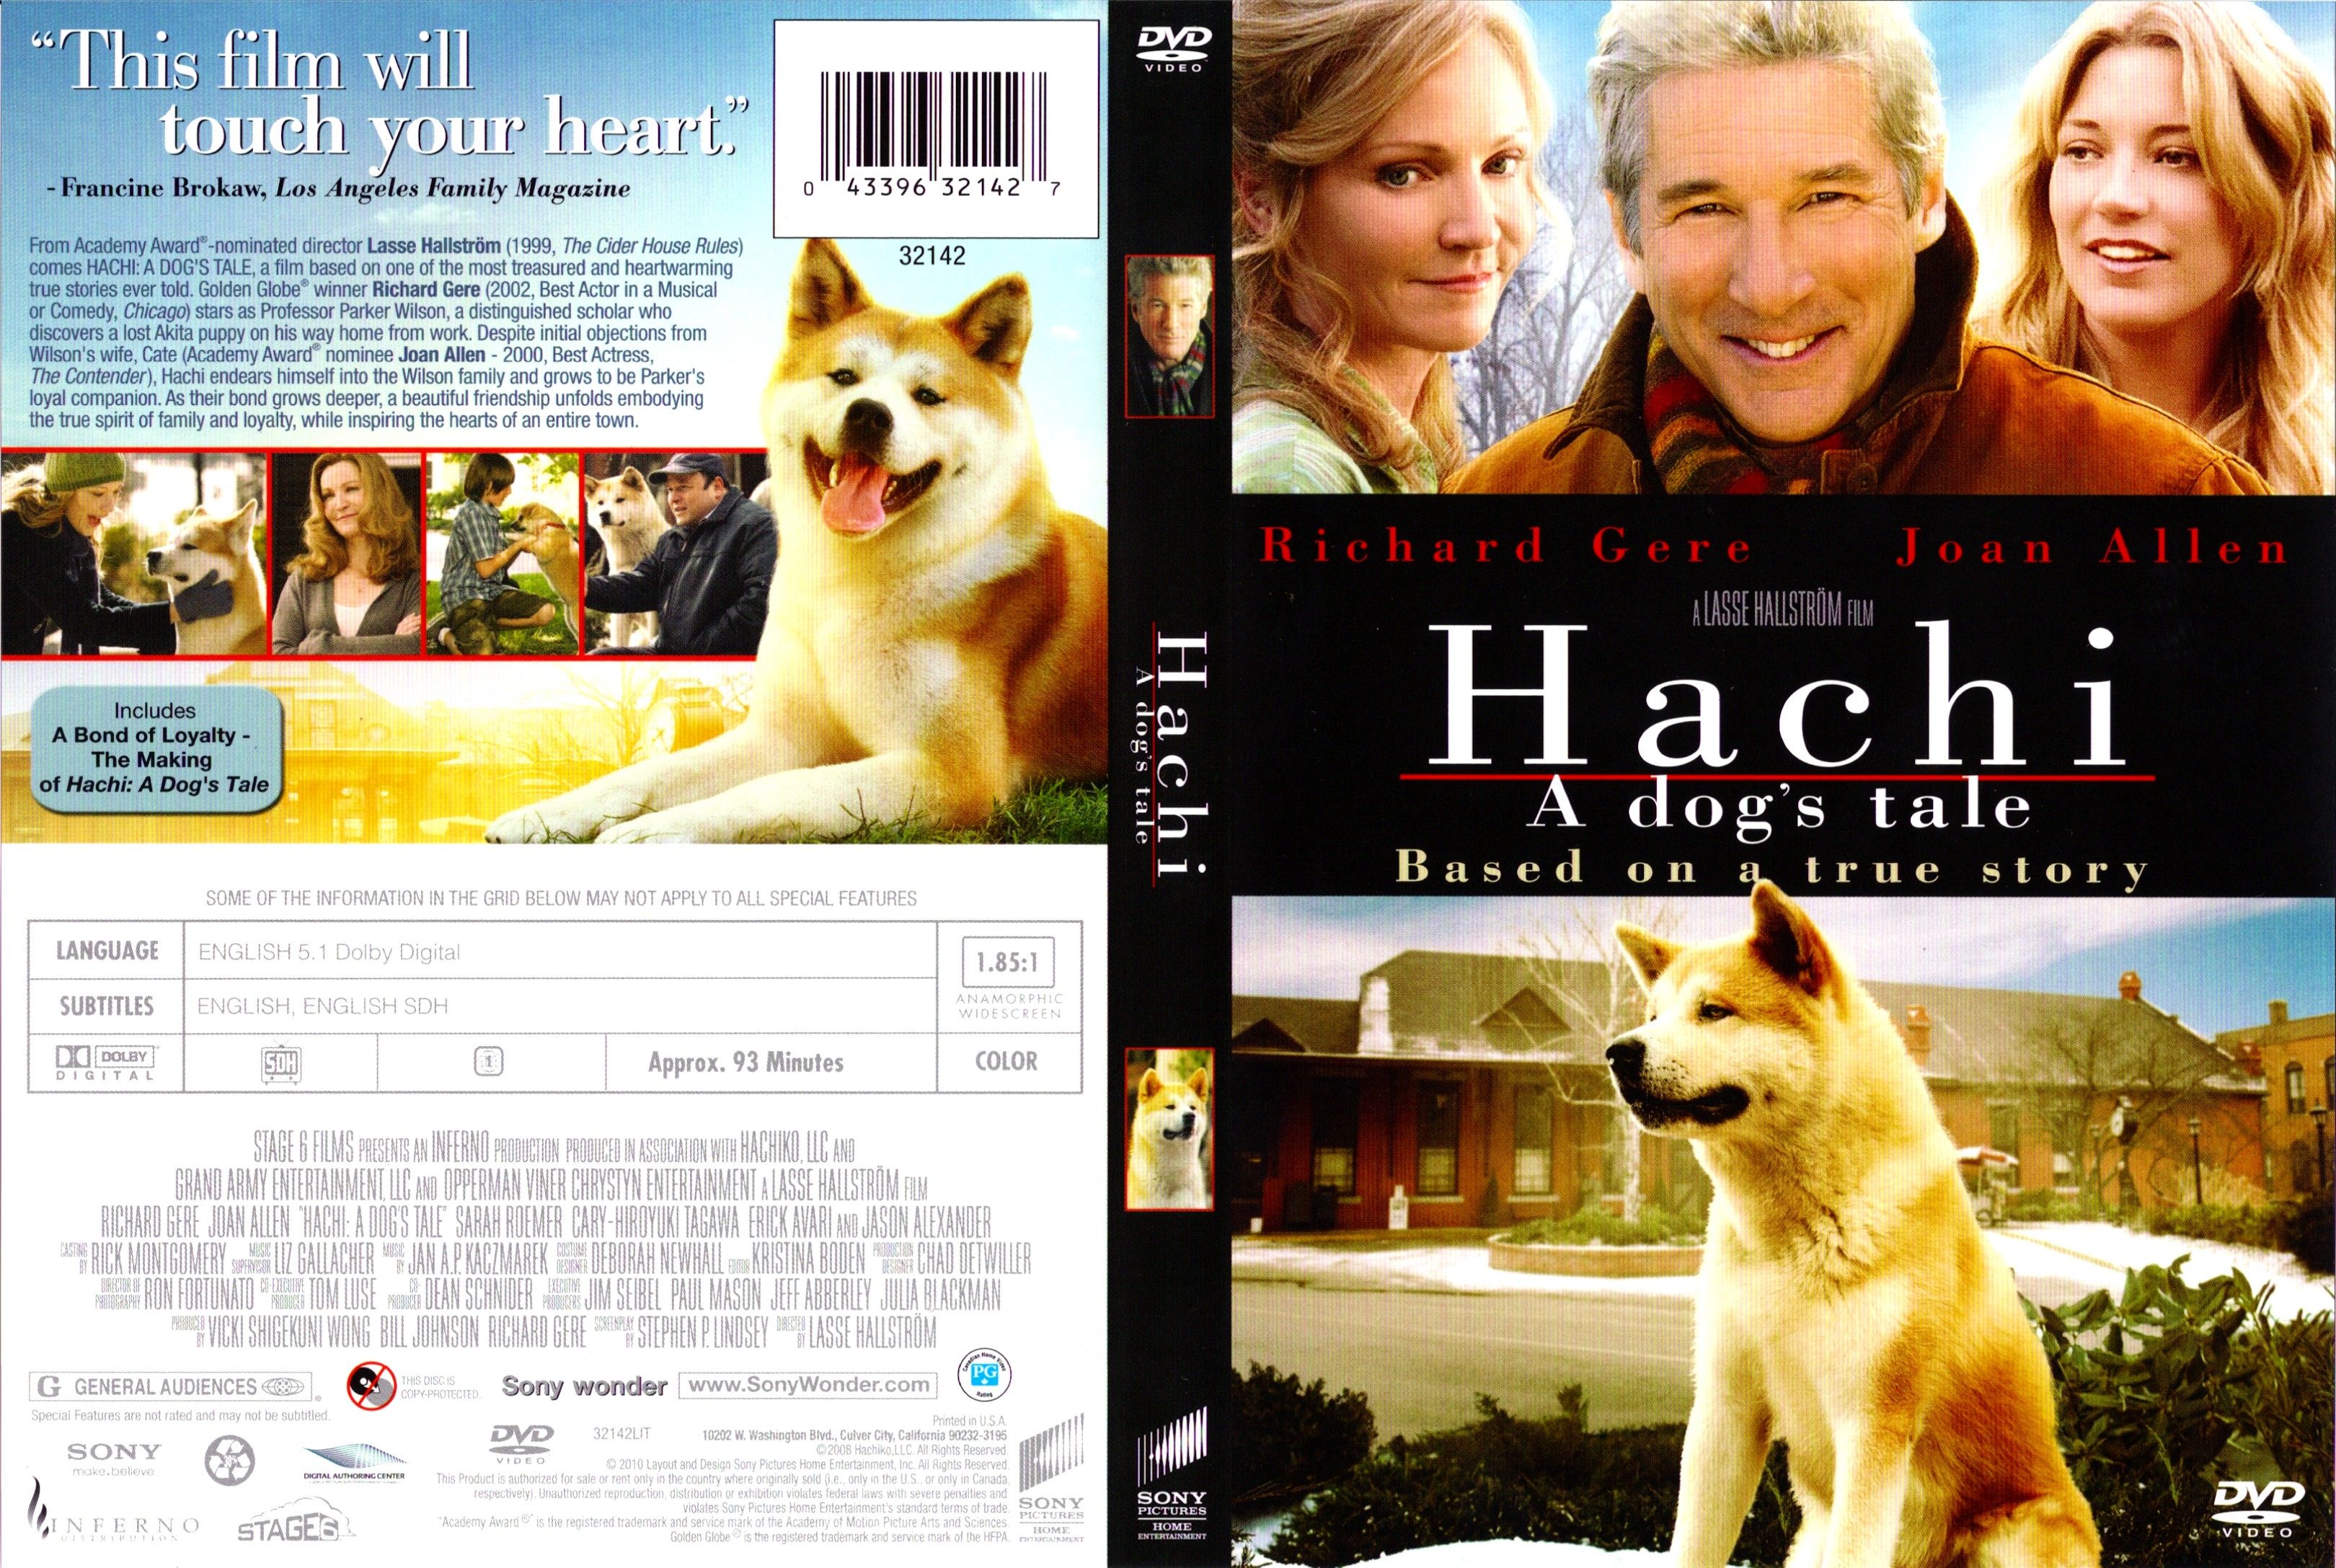 hachi a dogs tale 2009 1080p index of